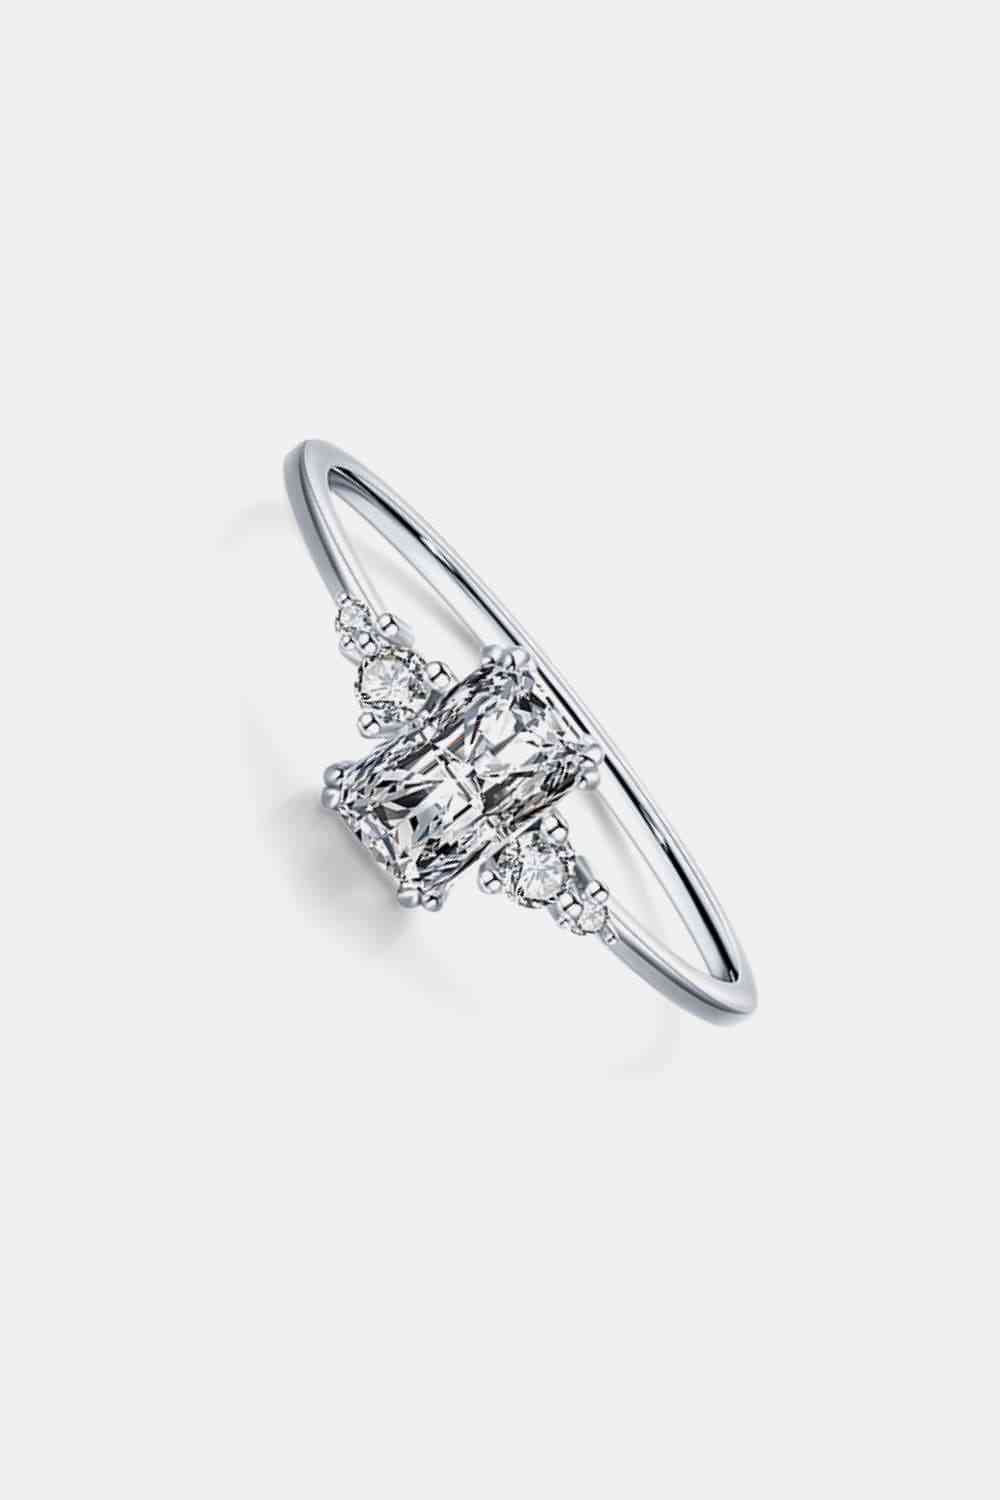 Radiant Cut White Zircon Ring Gold/Silver